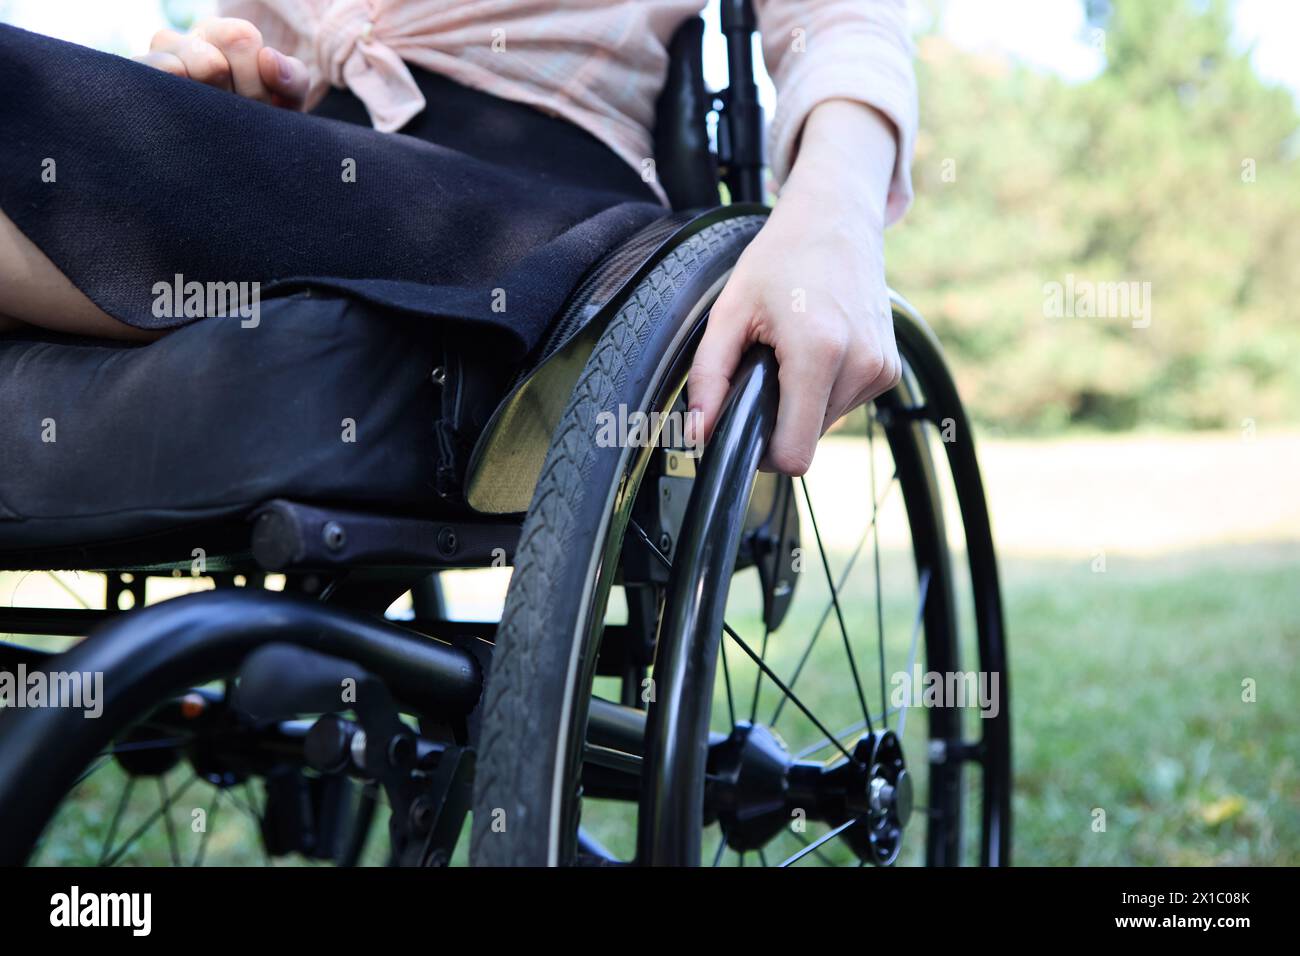 Close-up image of a person's hands maneuvering a wheelchair in a scenic park. This photo captures the essence of accessibility and active lifestyle fo Stock Photo